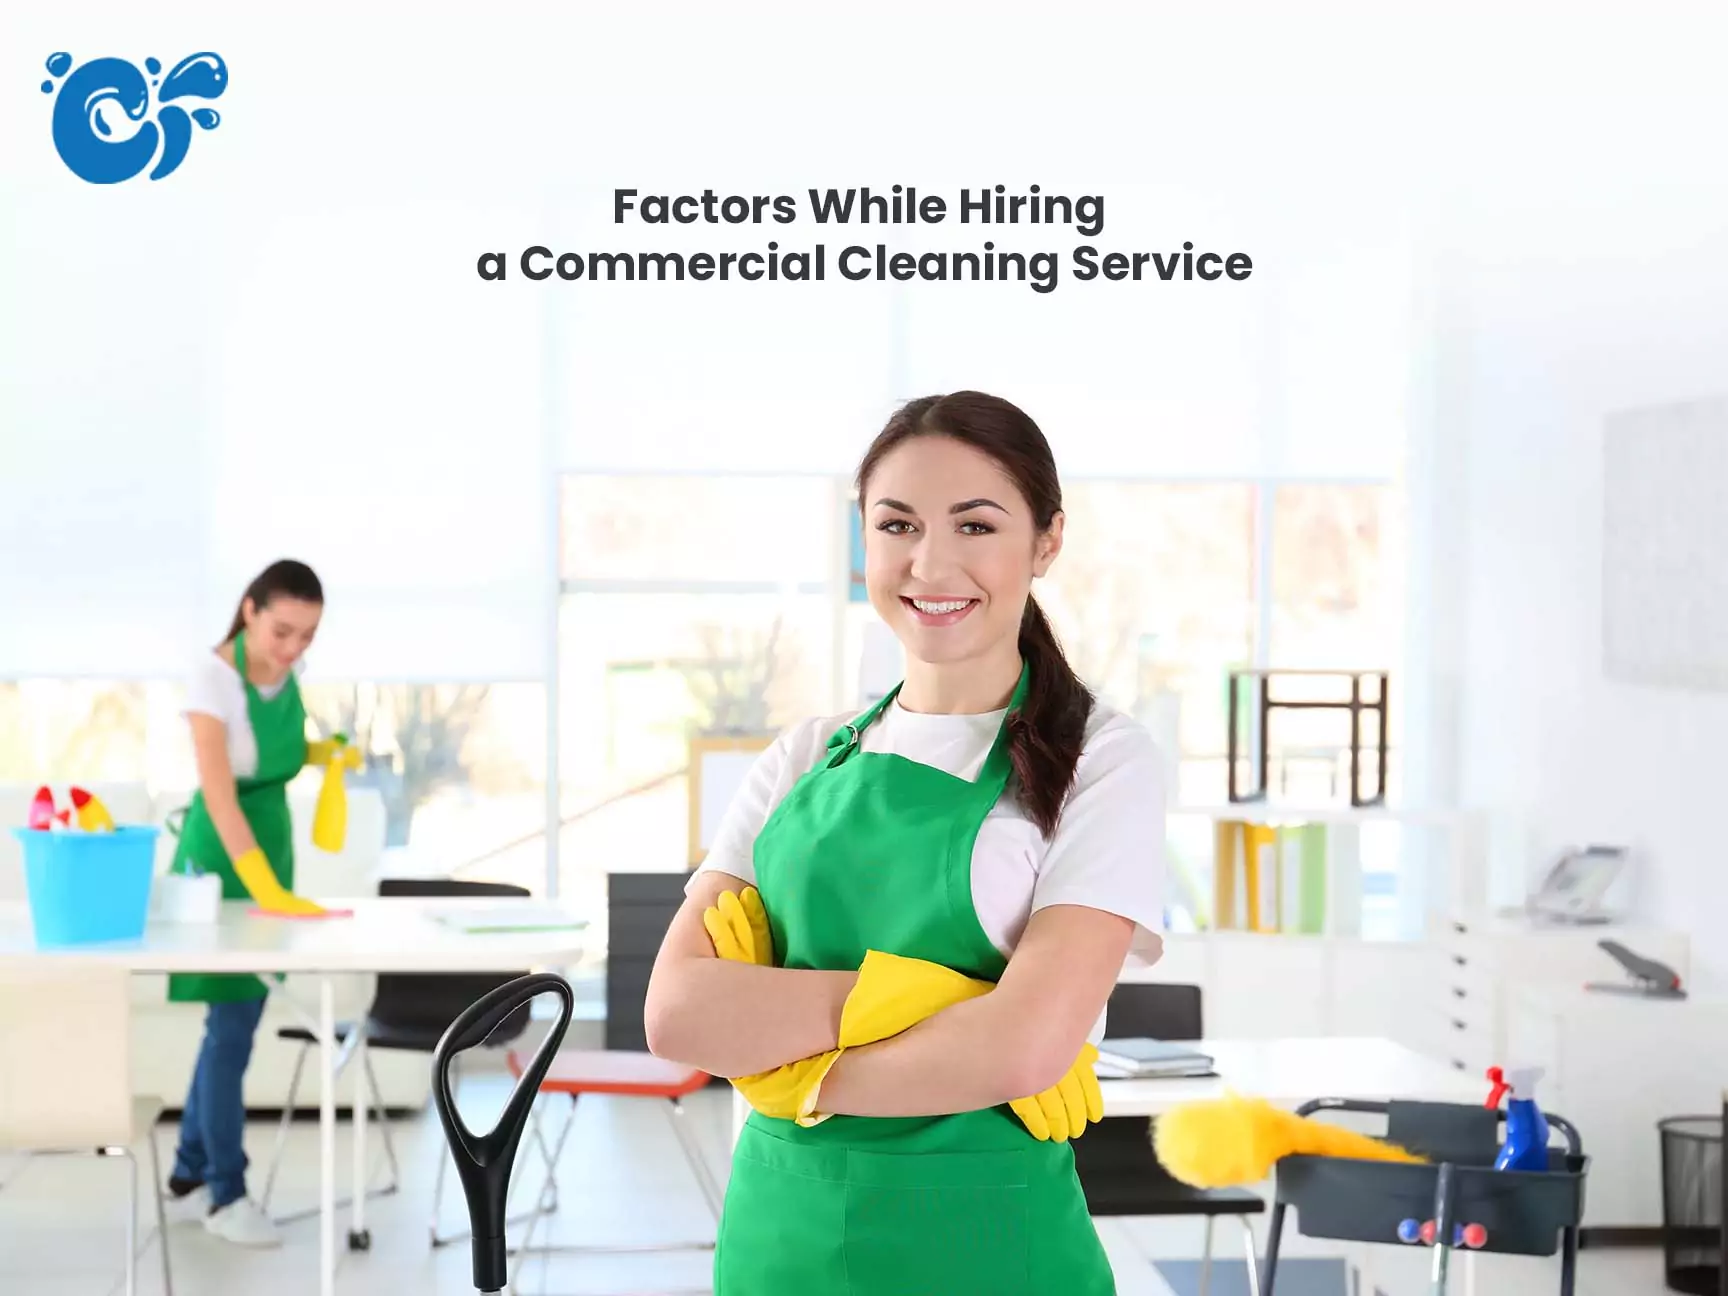 Factors While Hiring a Commercial Cleaning Service